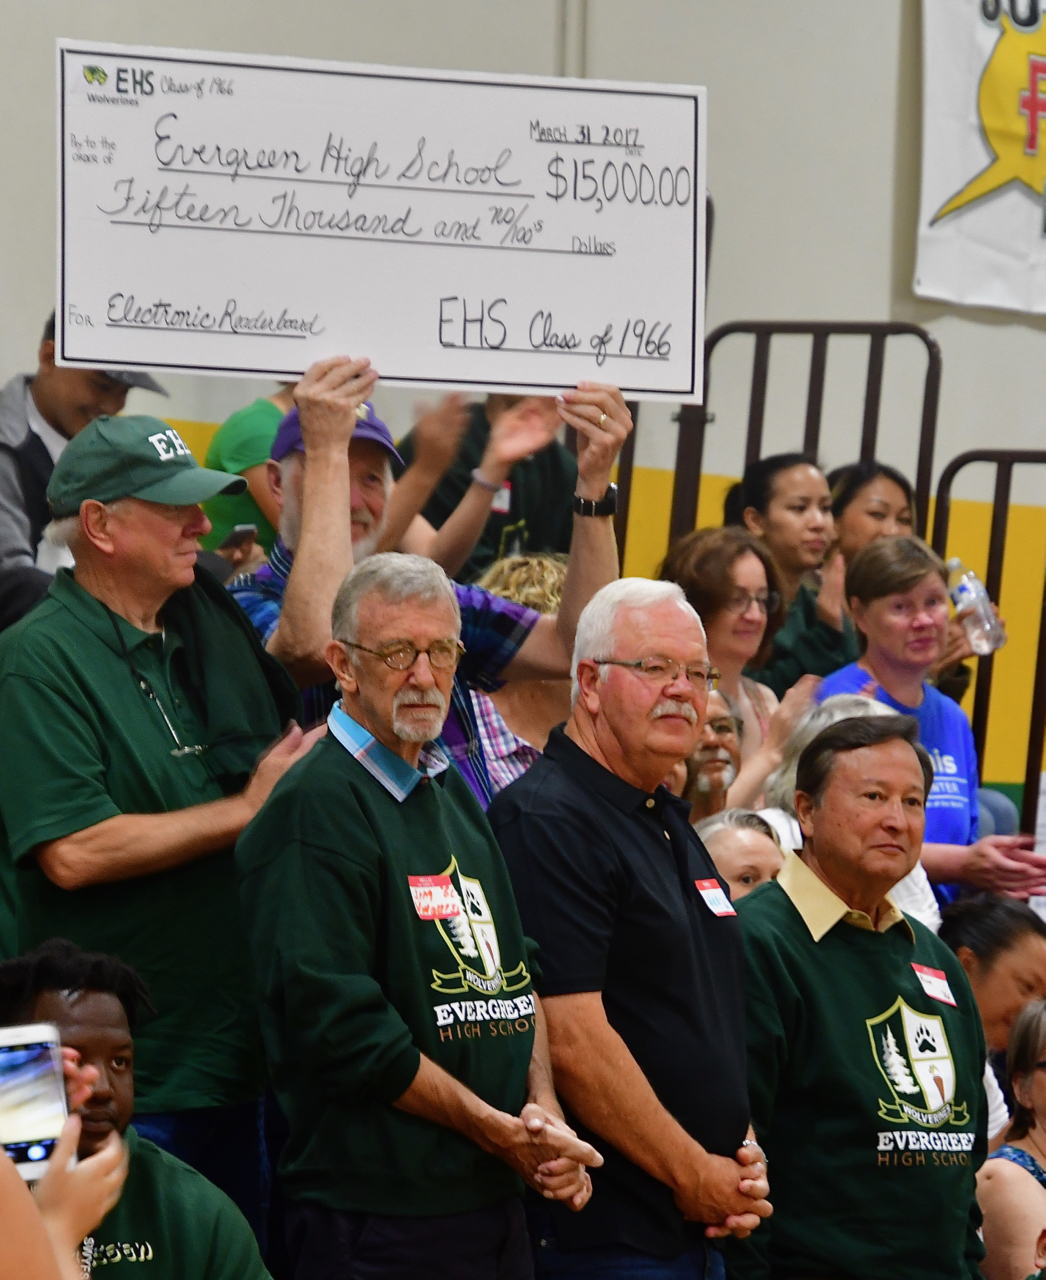 The Class of 1966 was there to present a check for $15,000 to buy a new readerboard. Photo by Patrick Robinson